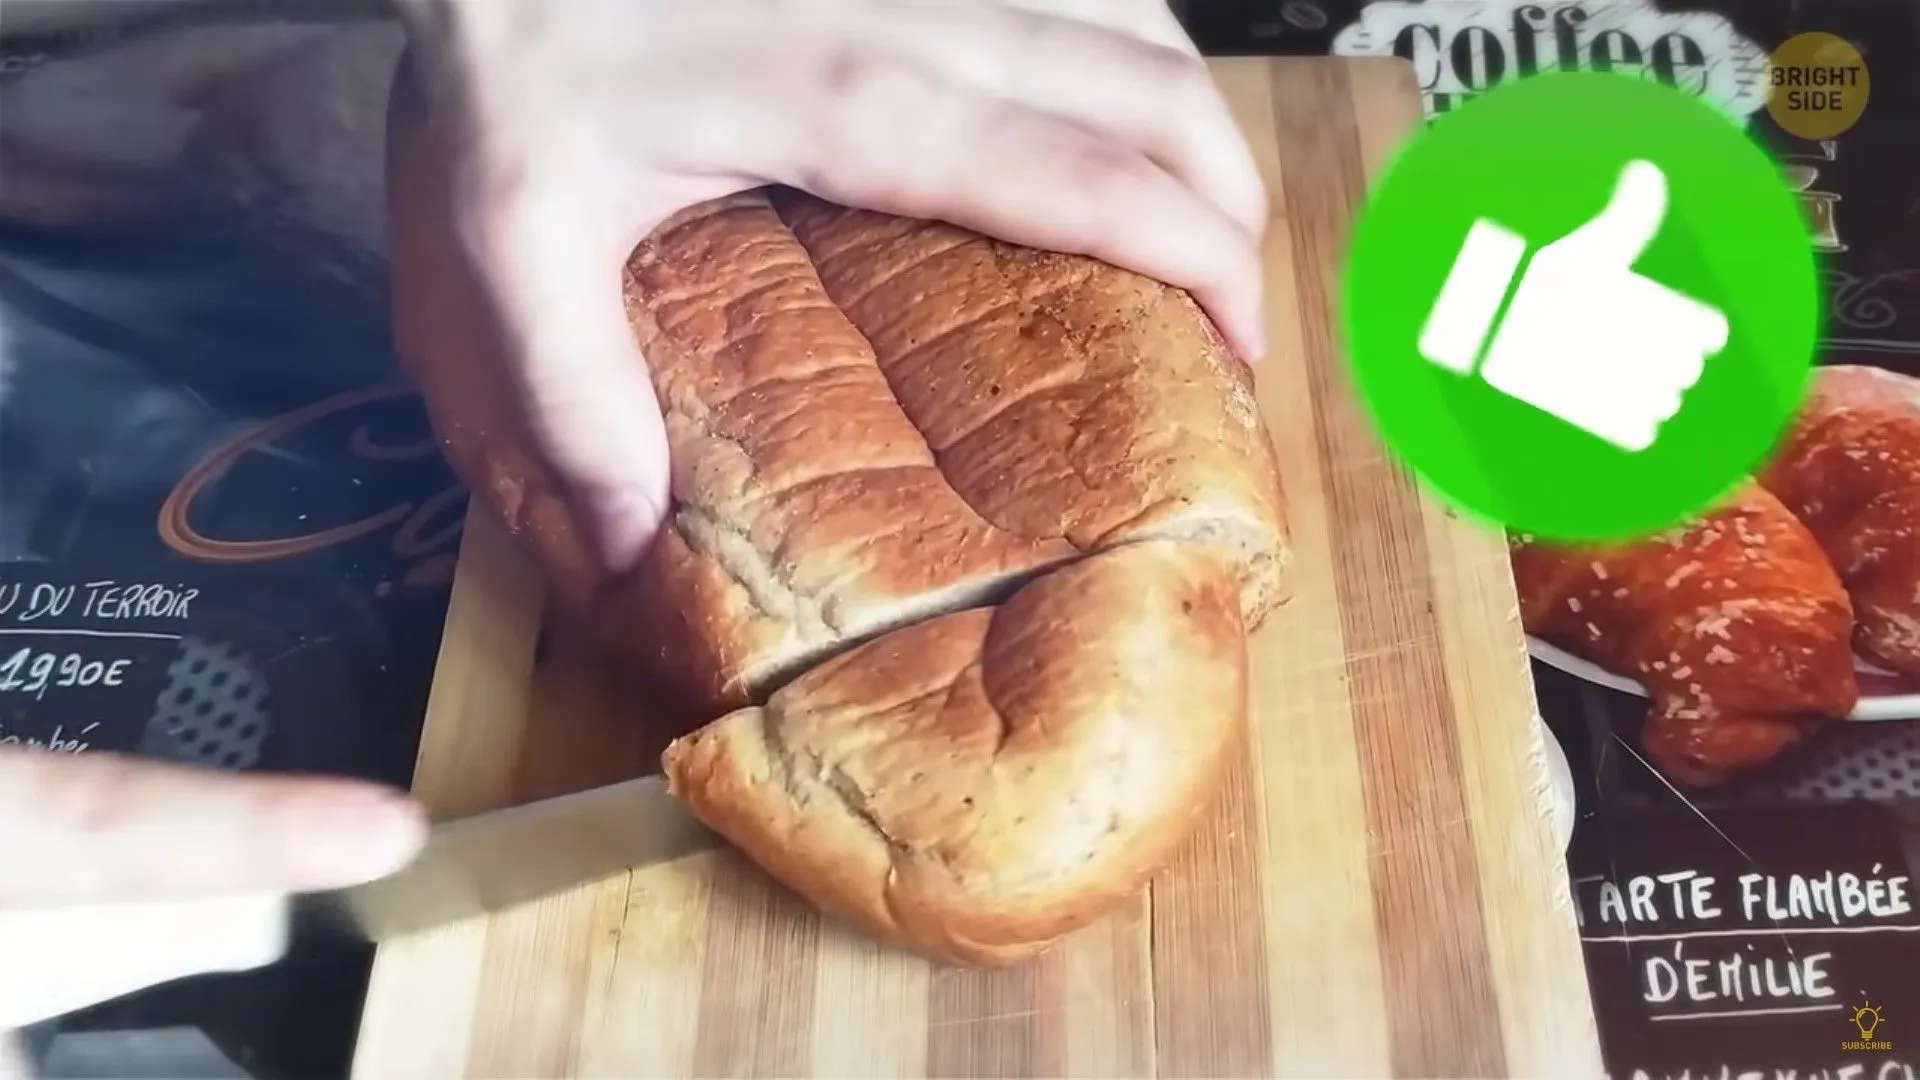 How to correctly slice bread.jpg?format=webp